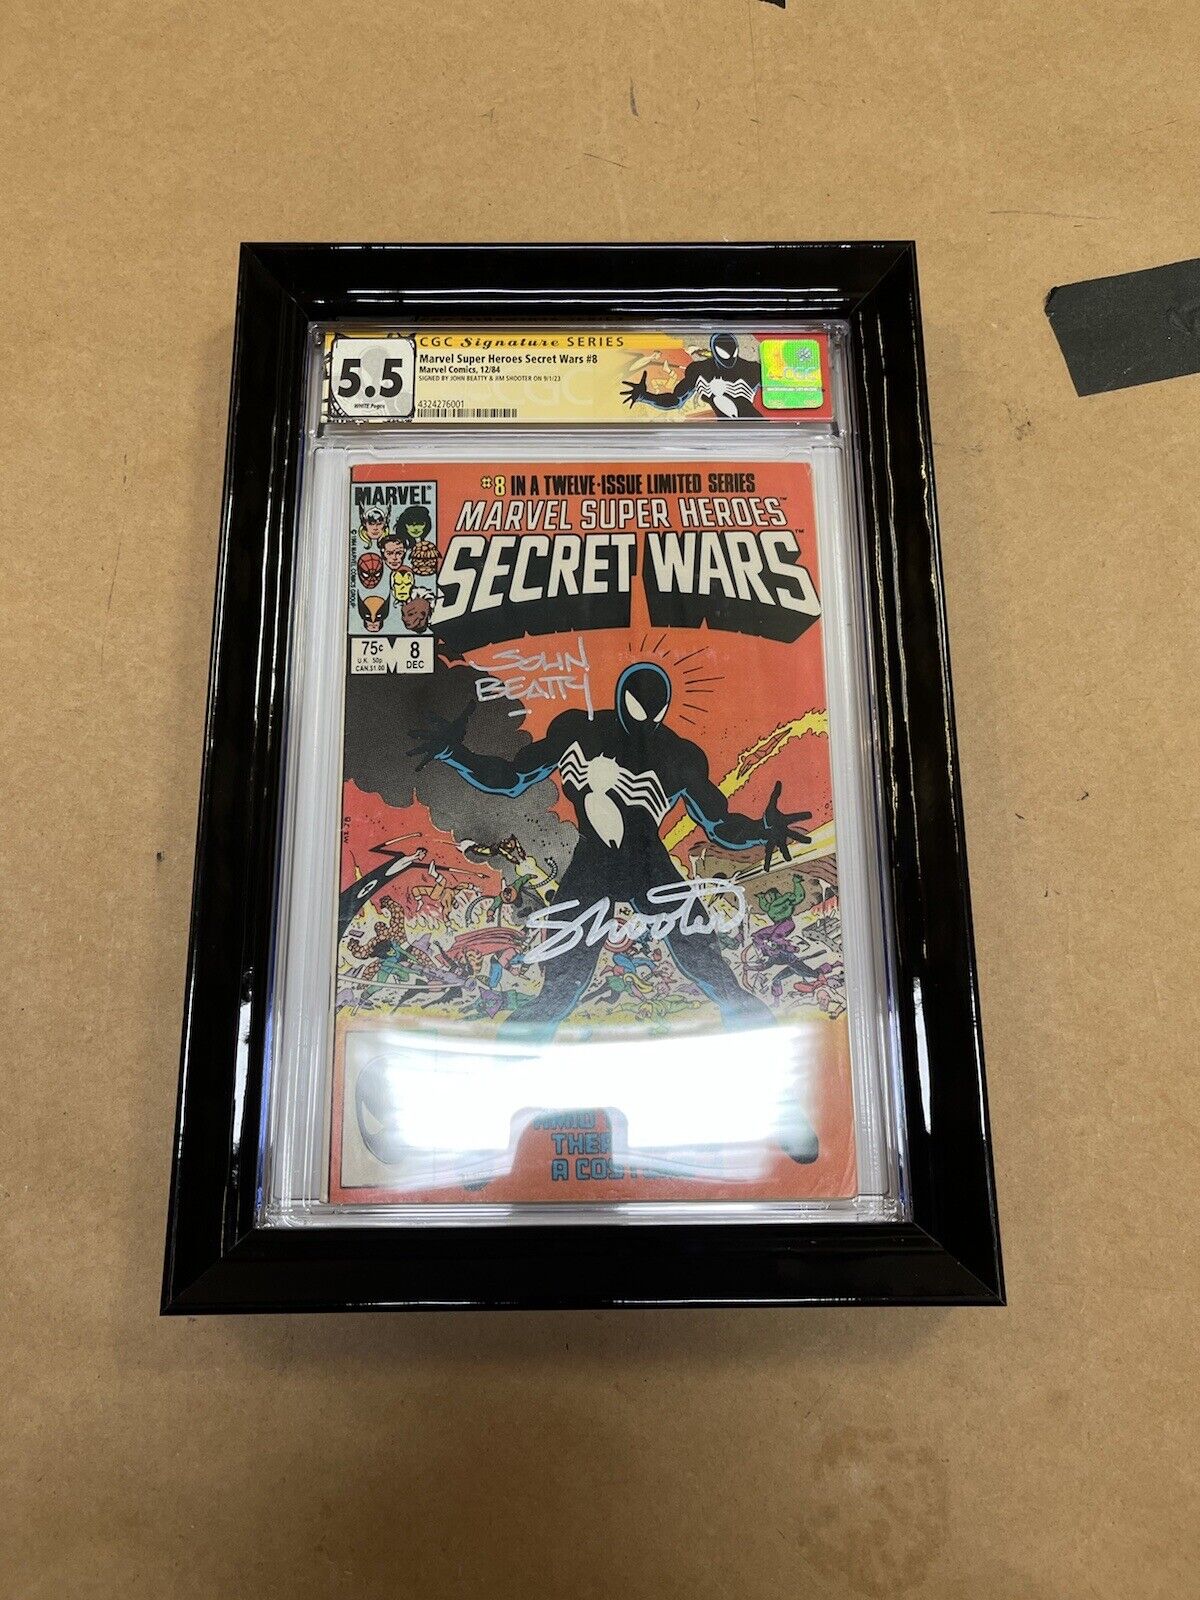 Secret Wars #8 CGC 5.5 Signed By Shooter & Beatty. Framed